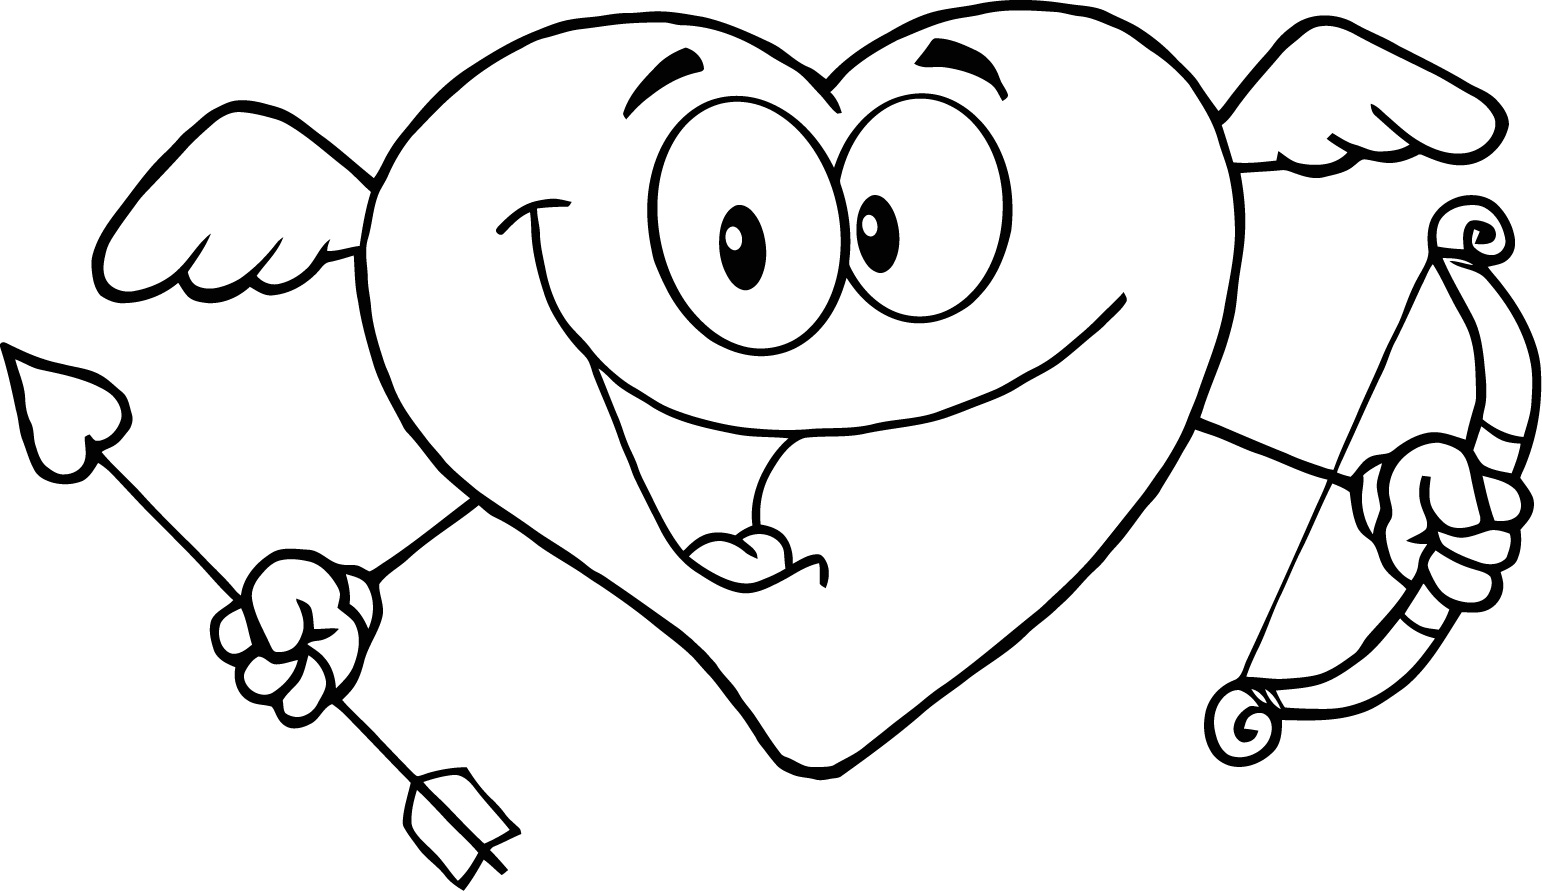 86 Cute Coloring Pages For Your Best Friend  Latest HD